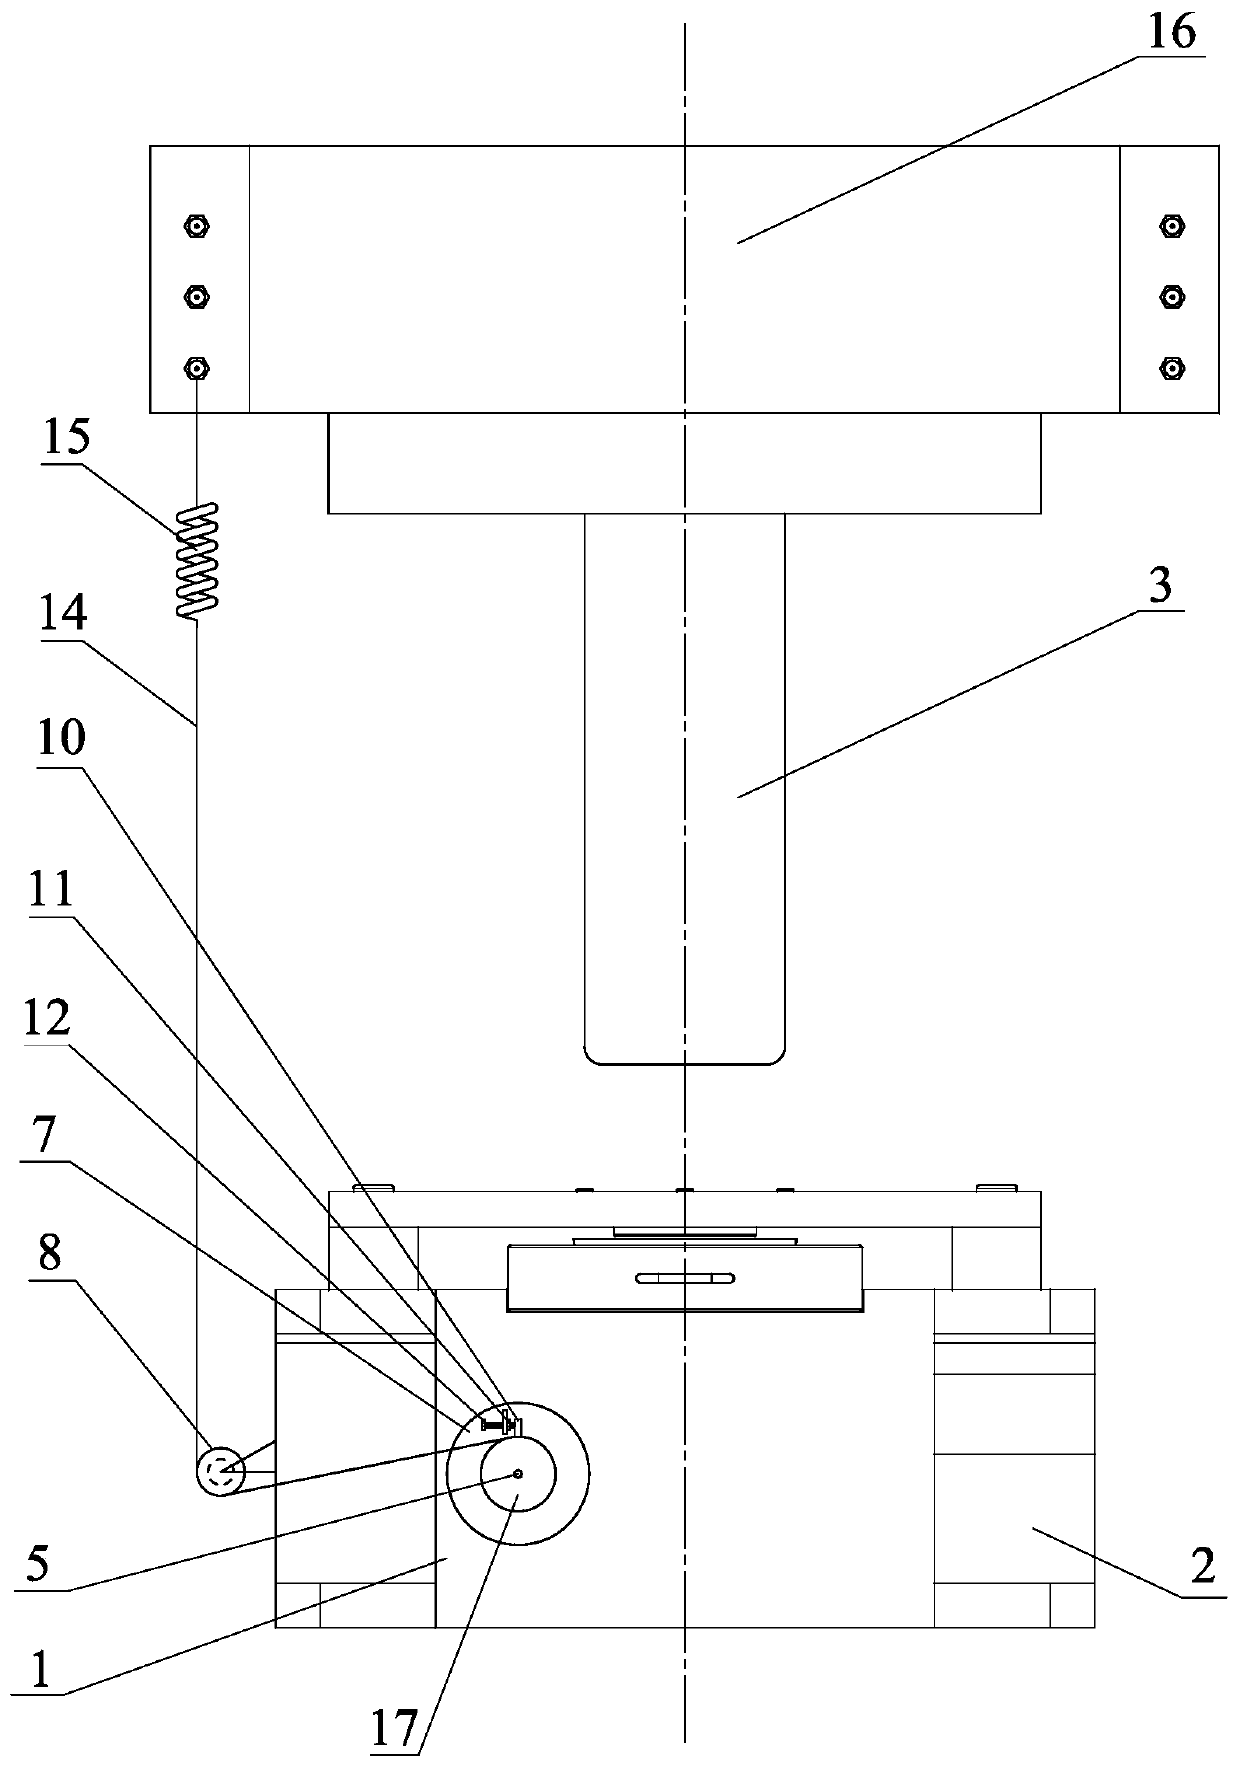 A Roller Reset Method for Roll Extrusion Forming Rollers with Variable Wall Thickness